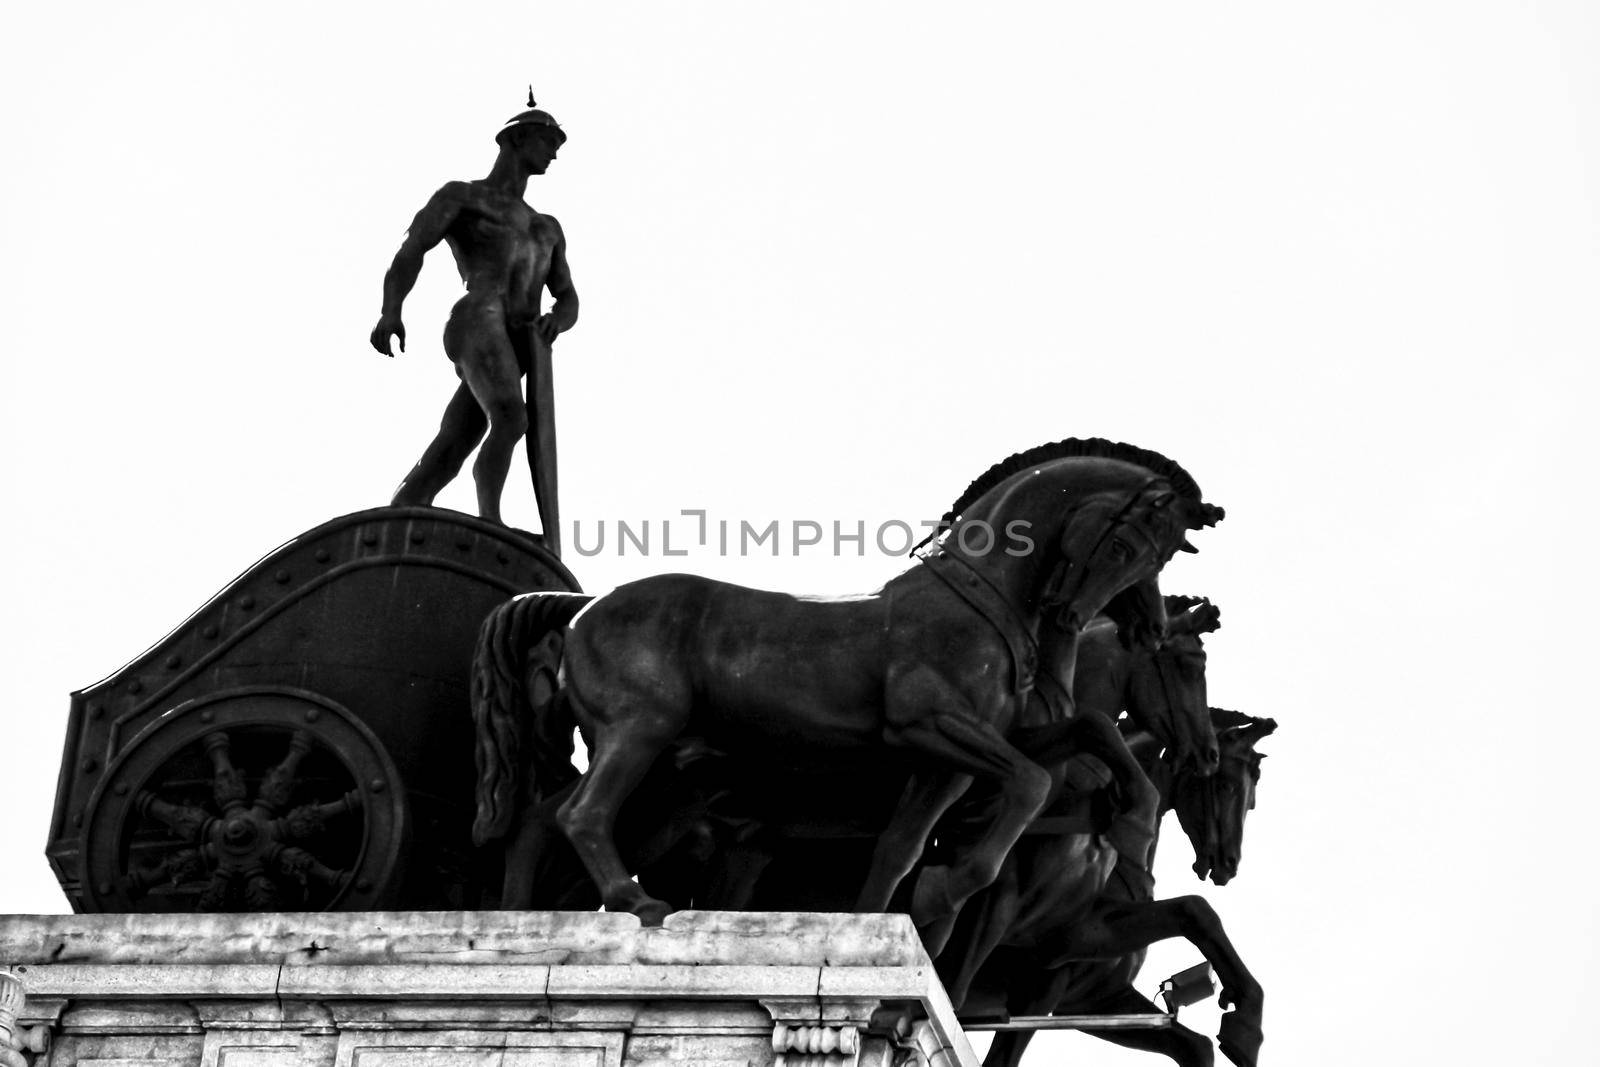 Quadriga statue on the roof of a building in Madrid by soniabonet